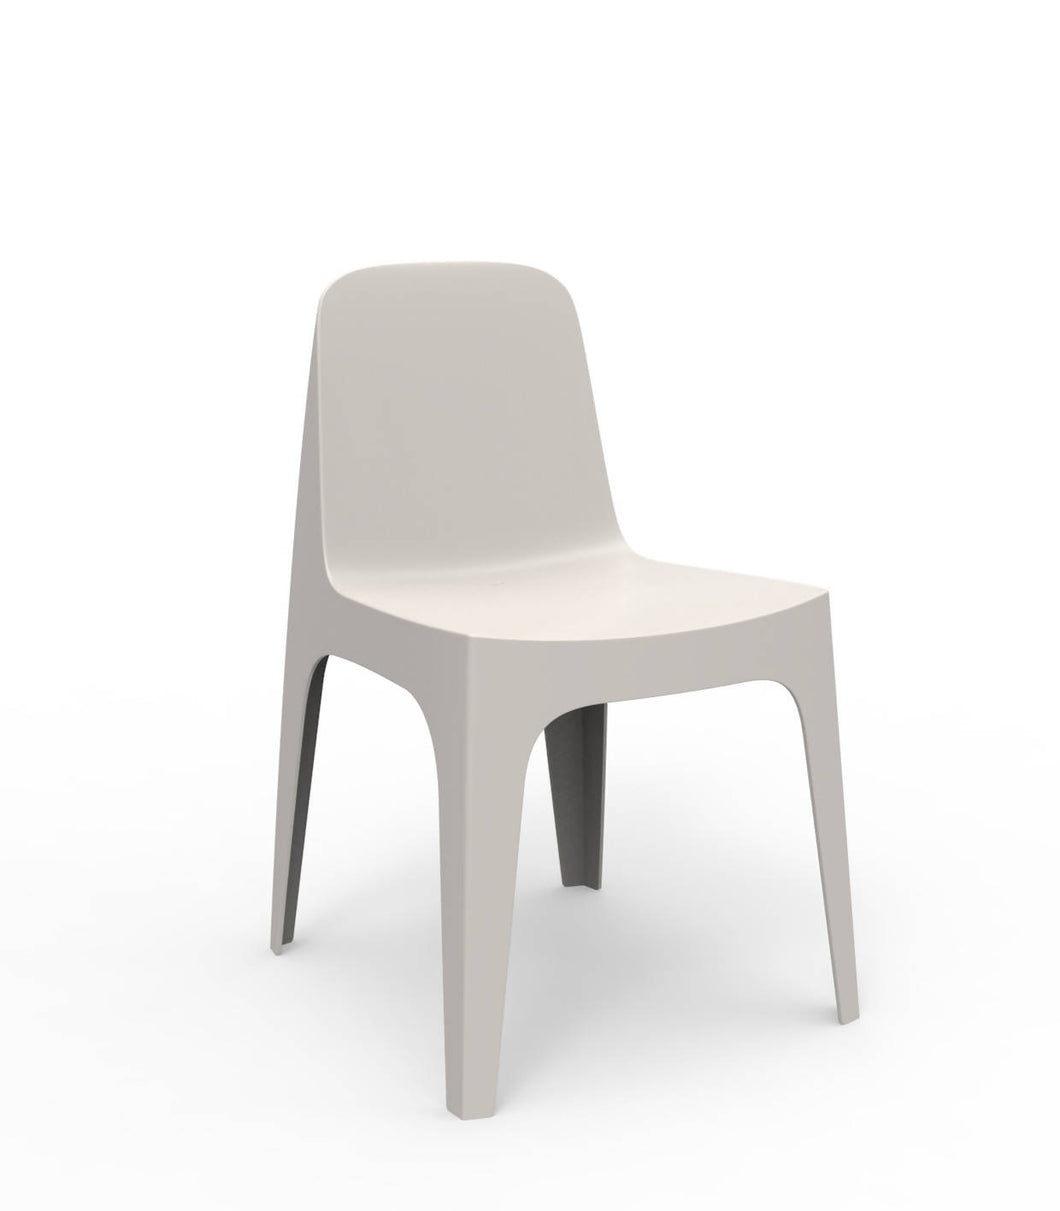 Solid Chair Ecru Color